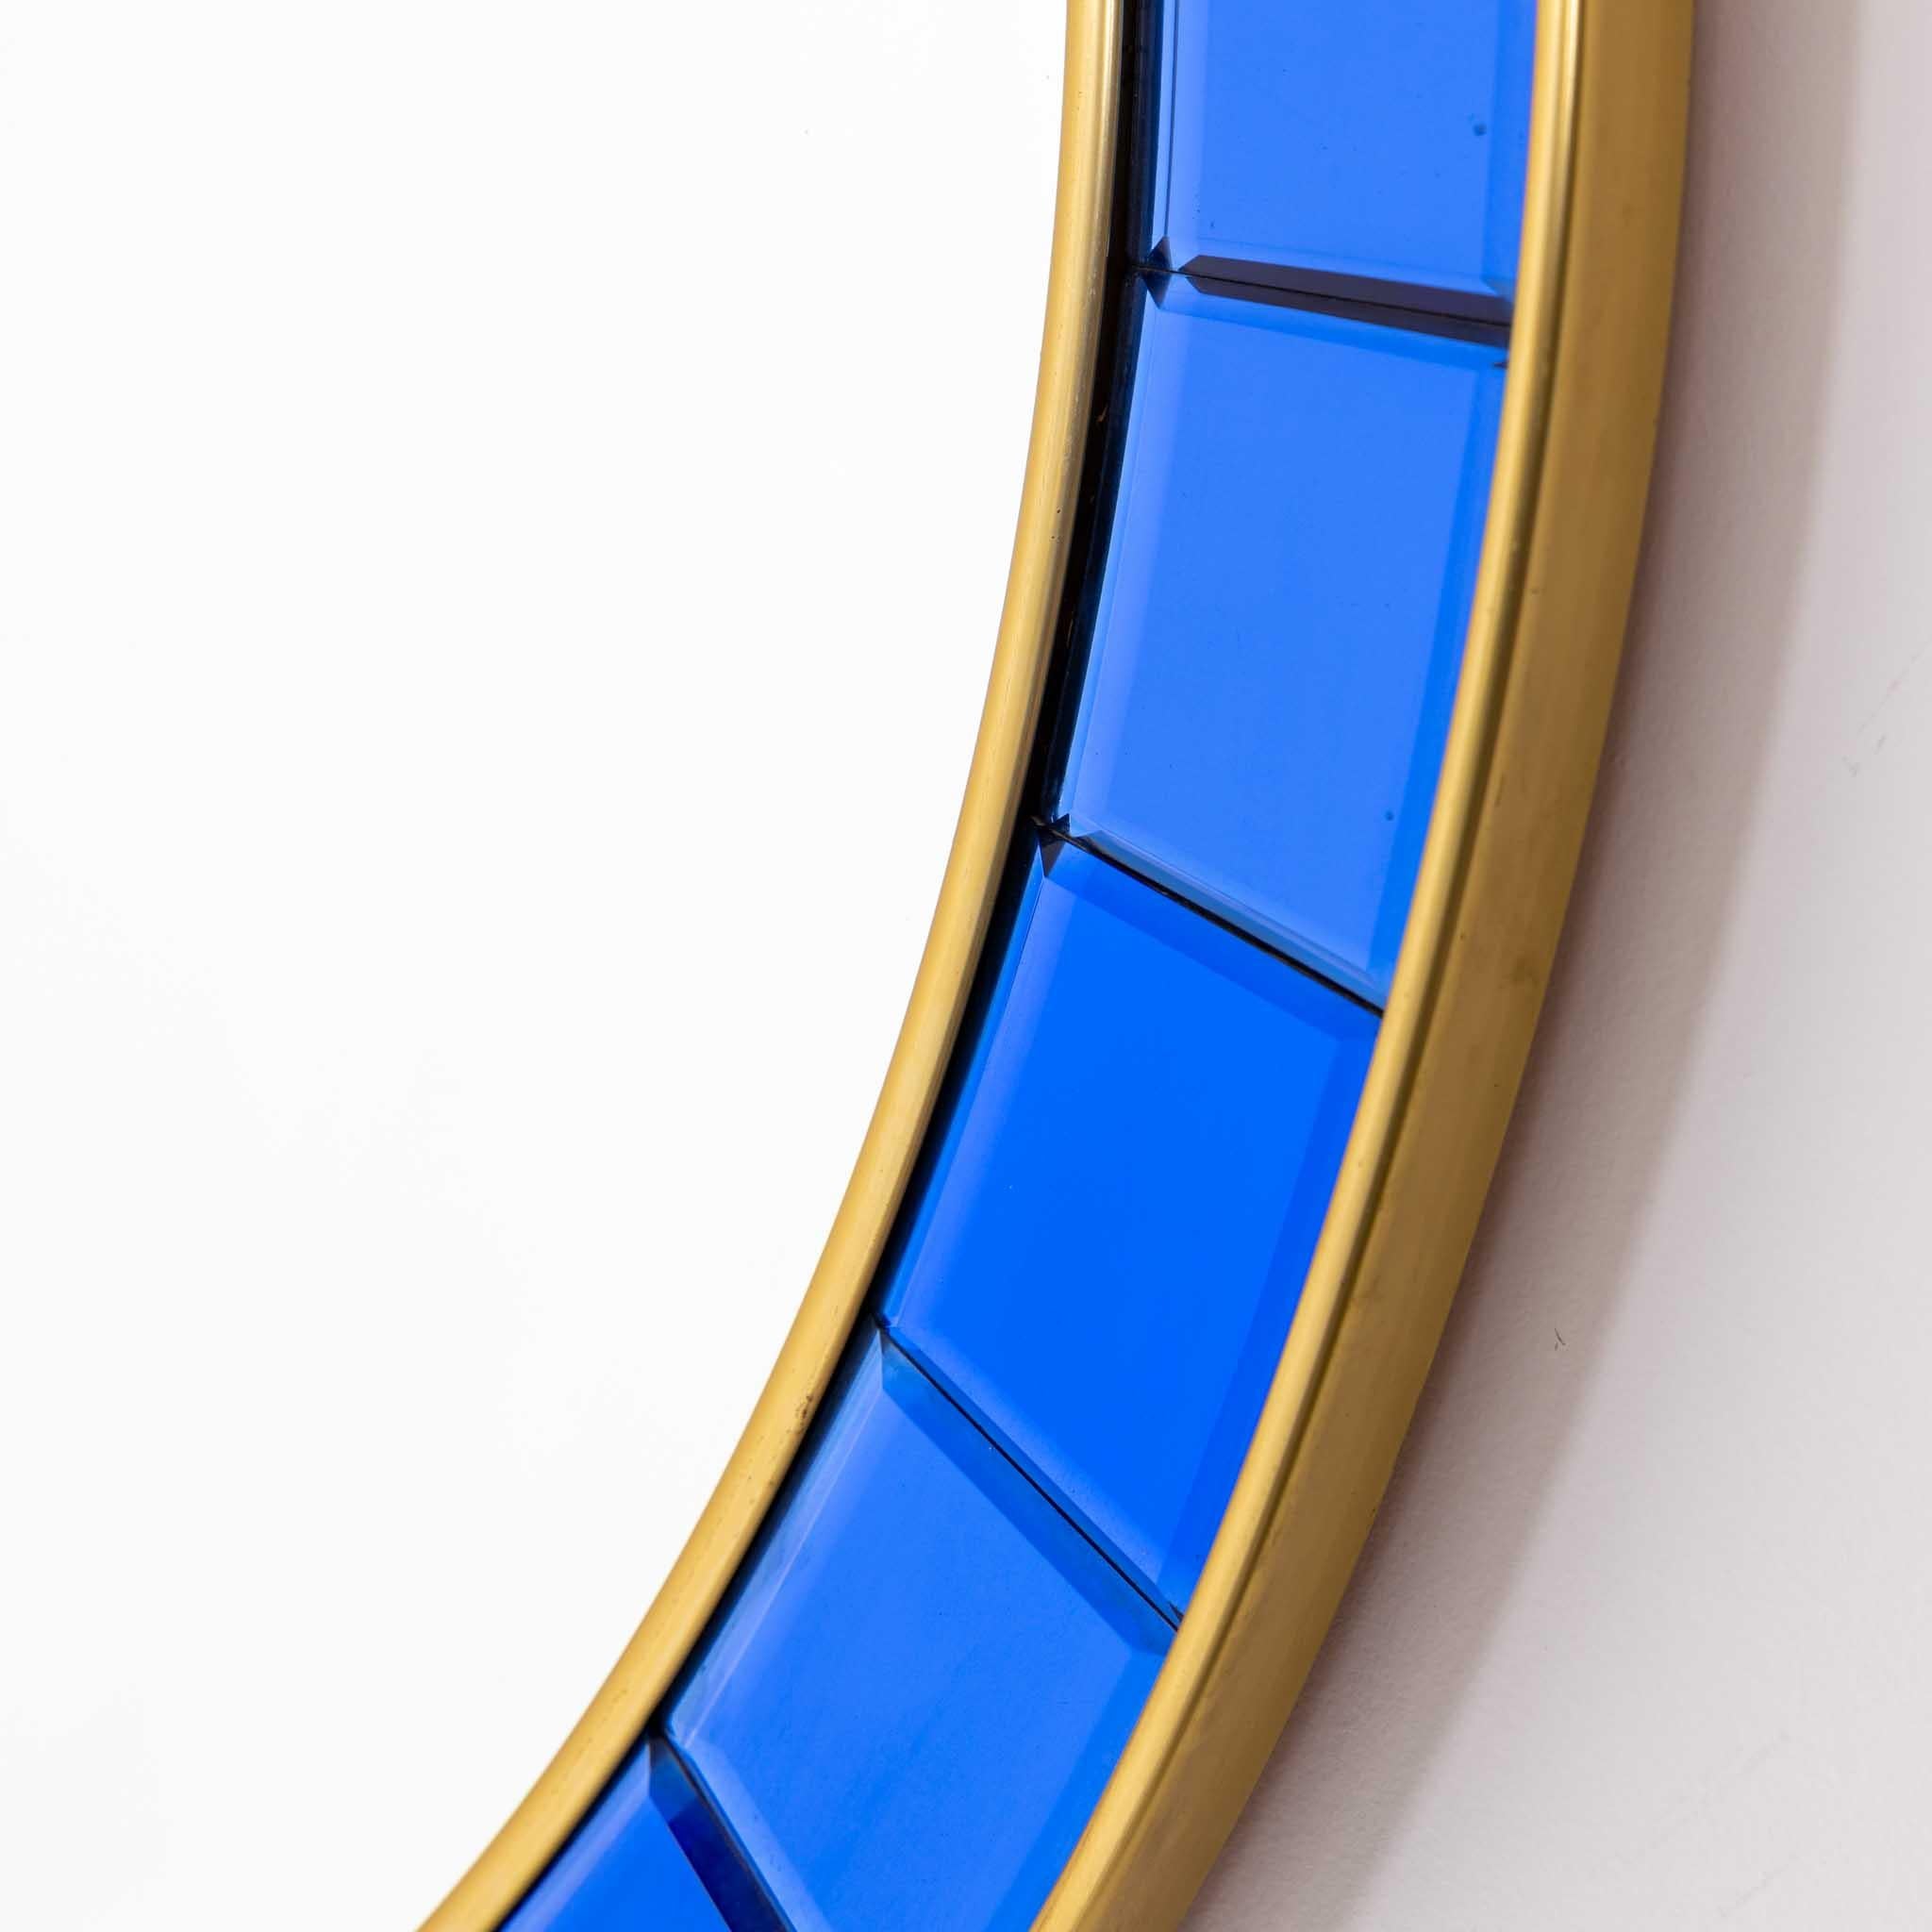 Cristal arte modernist wall mirror
Round cristal arte modernist wall mirror.
Central mirror surrounded by faceted, beveled,
crystal blue glass with brass details.